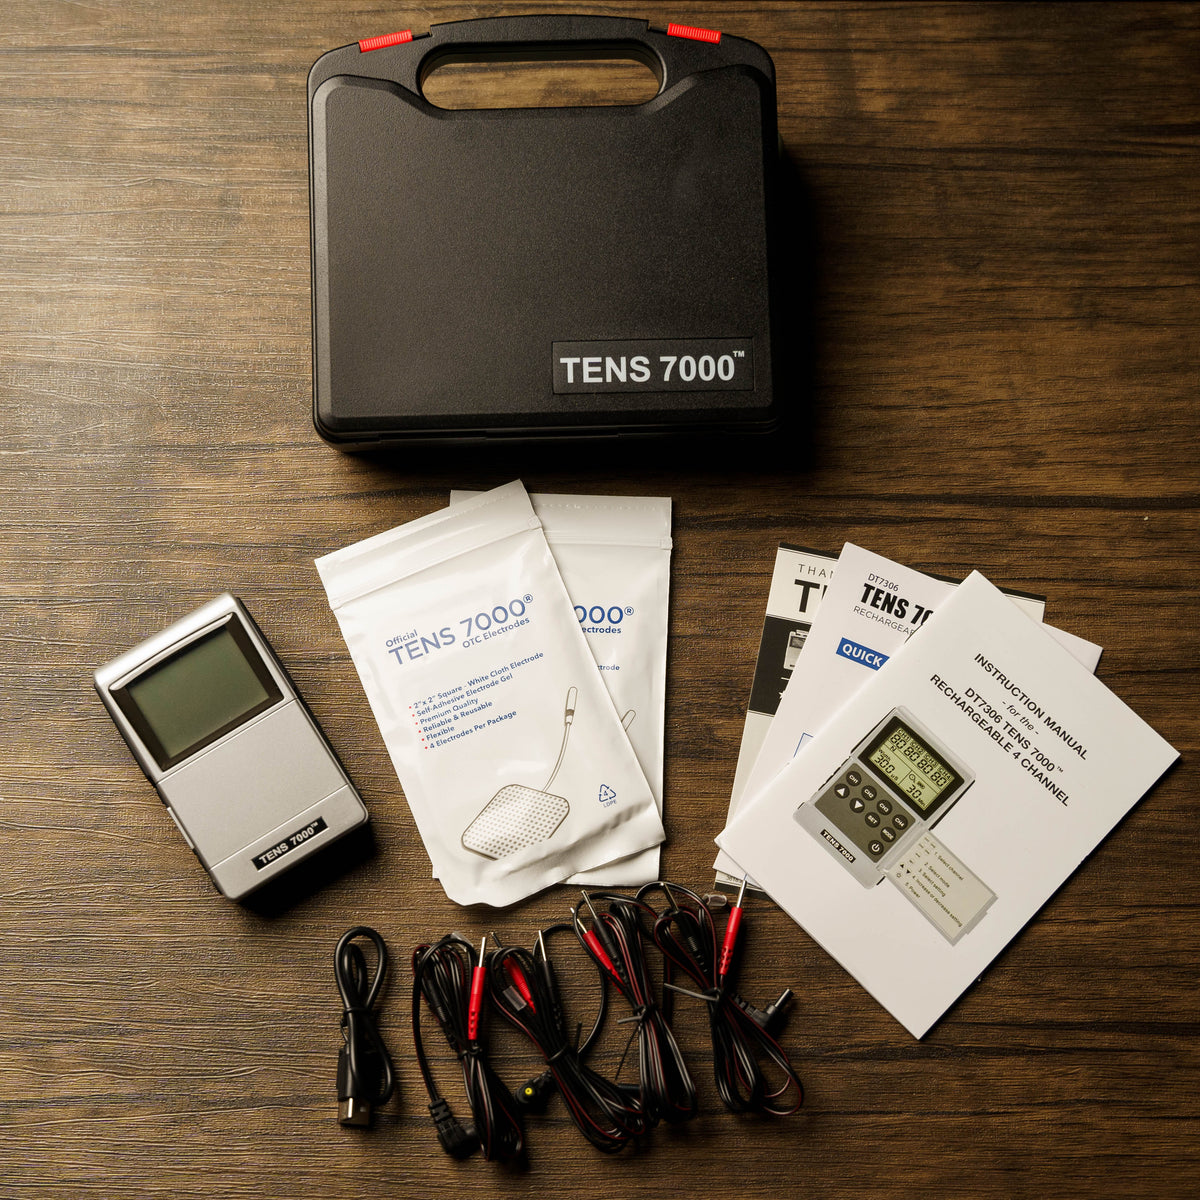 The TENS and EMS combo unit with everything included on a wood surface